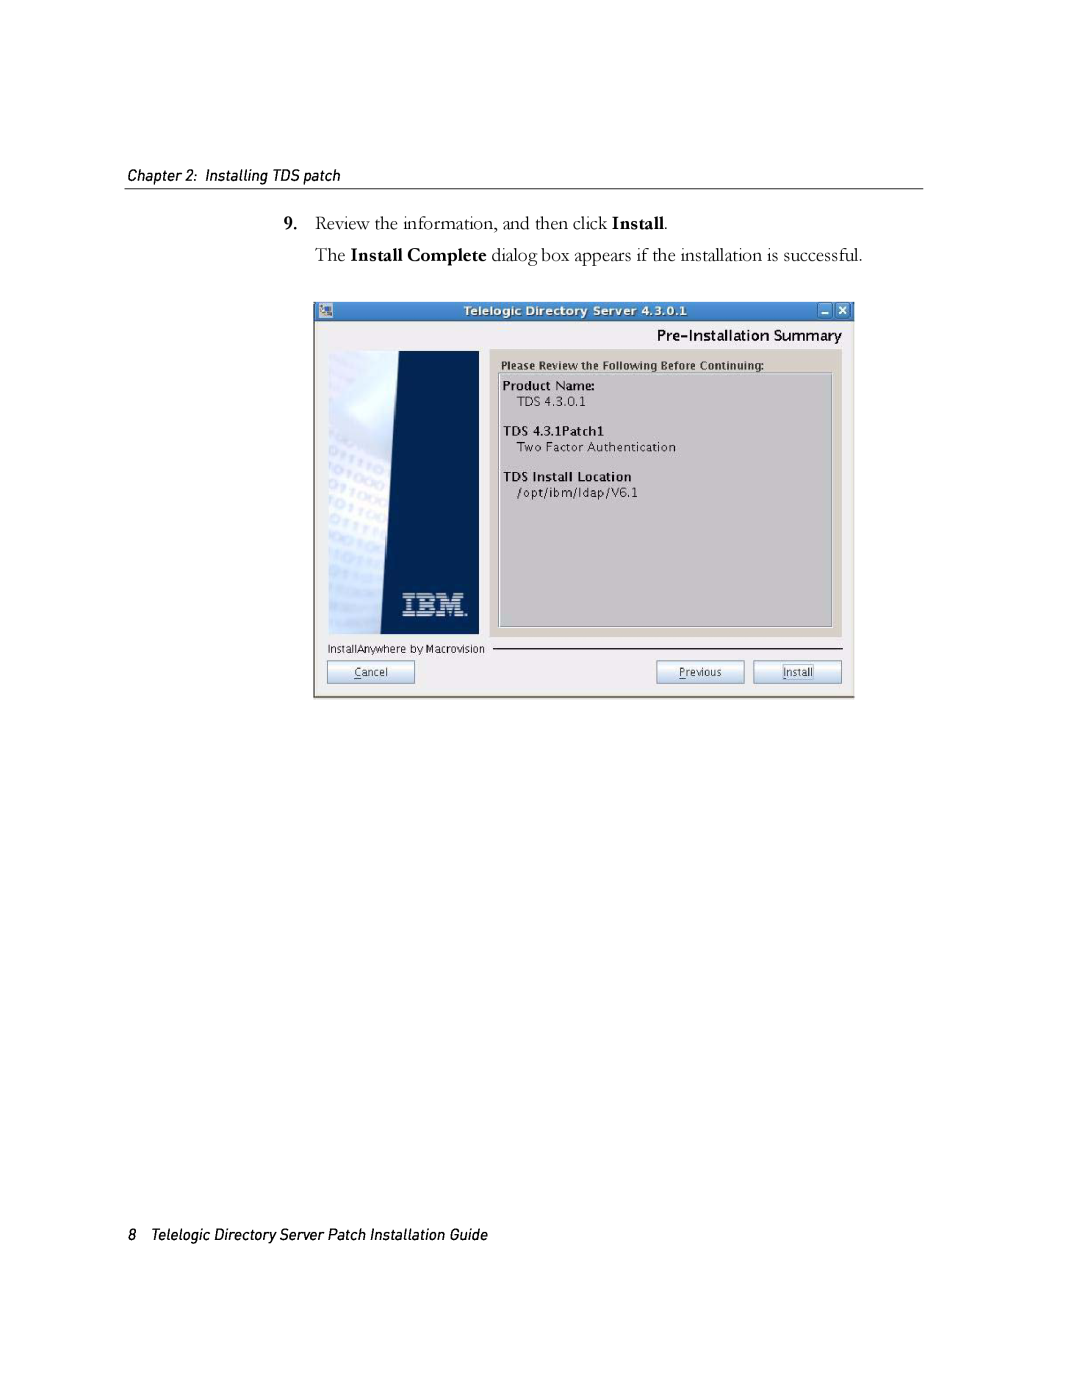 IBM Telelogic Directory Server manual Review the information, and then click Install, Installing TDS patch 